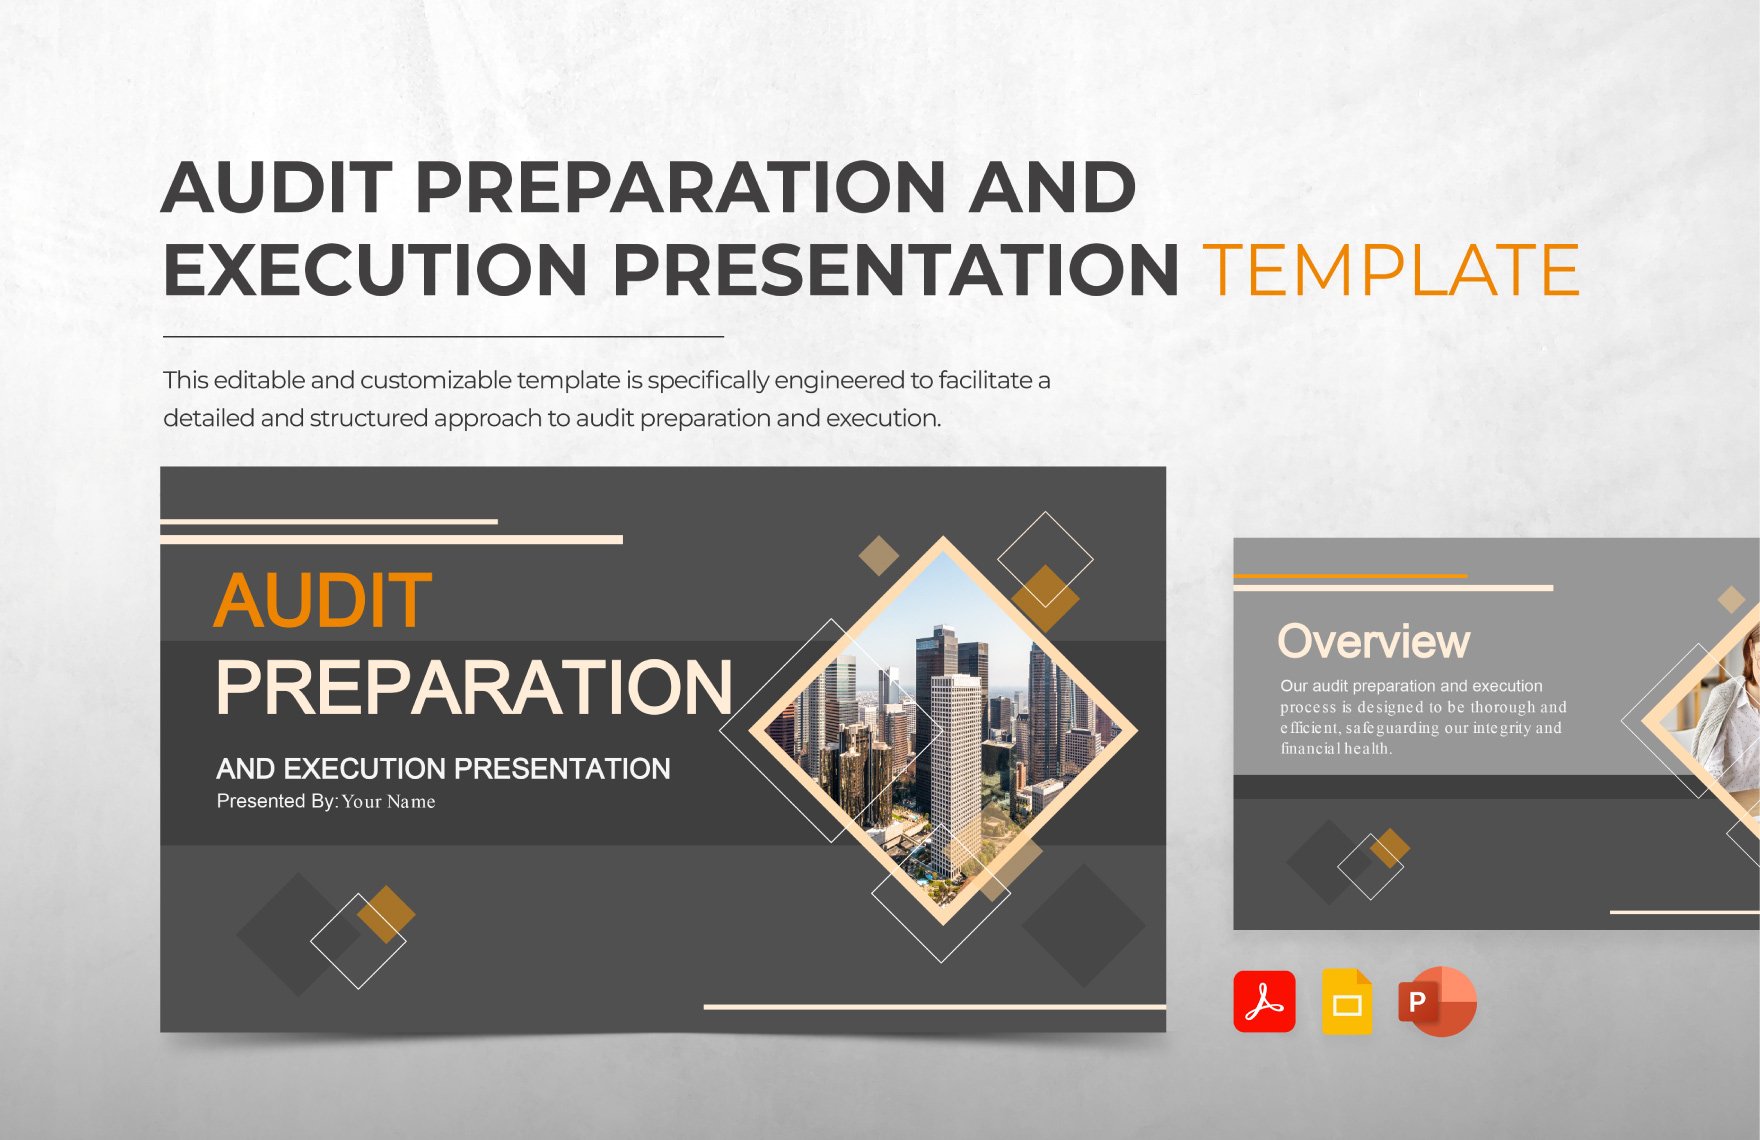 Free Audit Preparation and Execution Presentation Template in PDF, PowerPoint, Google Slides